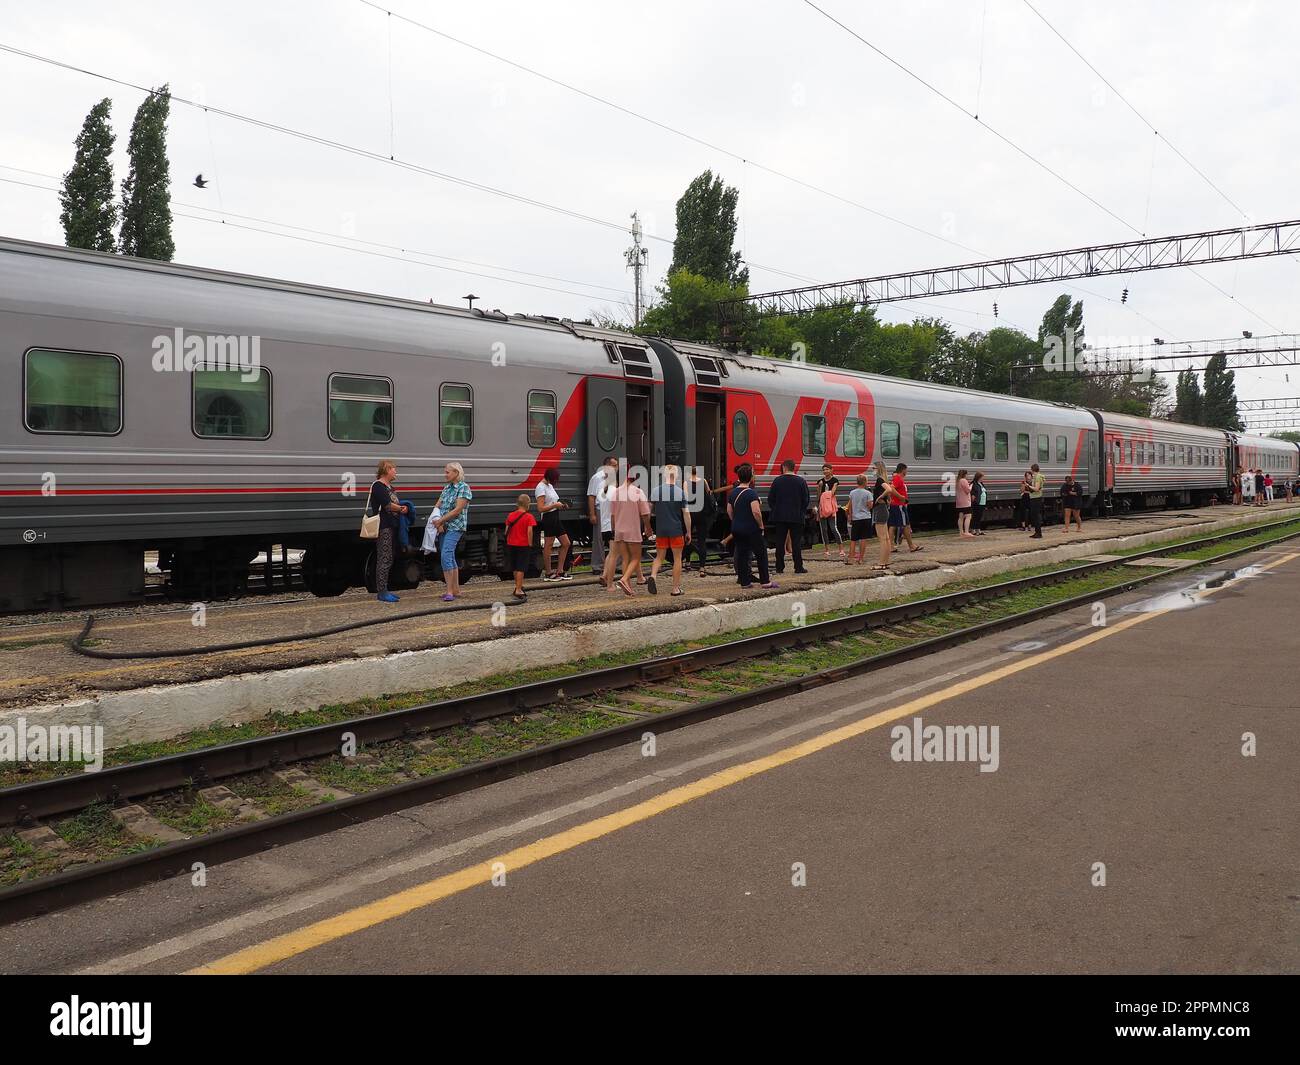 Usman, Lipetsk region, Russia, August 7, 2021. Station of the southeastern railway. The platform with people who got off the train. Russian Railways passenger train. Rails and sleepers. Stopover Stock Photo